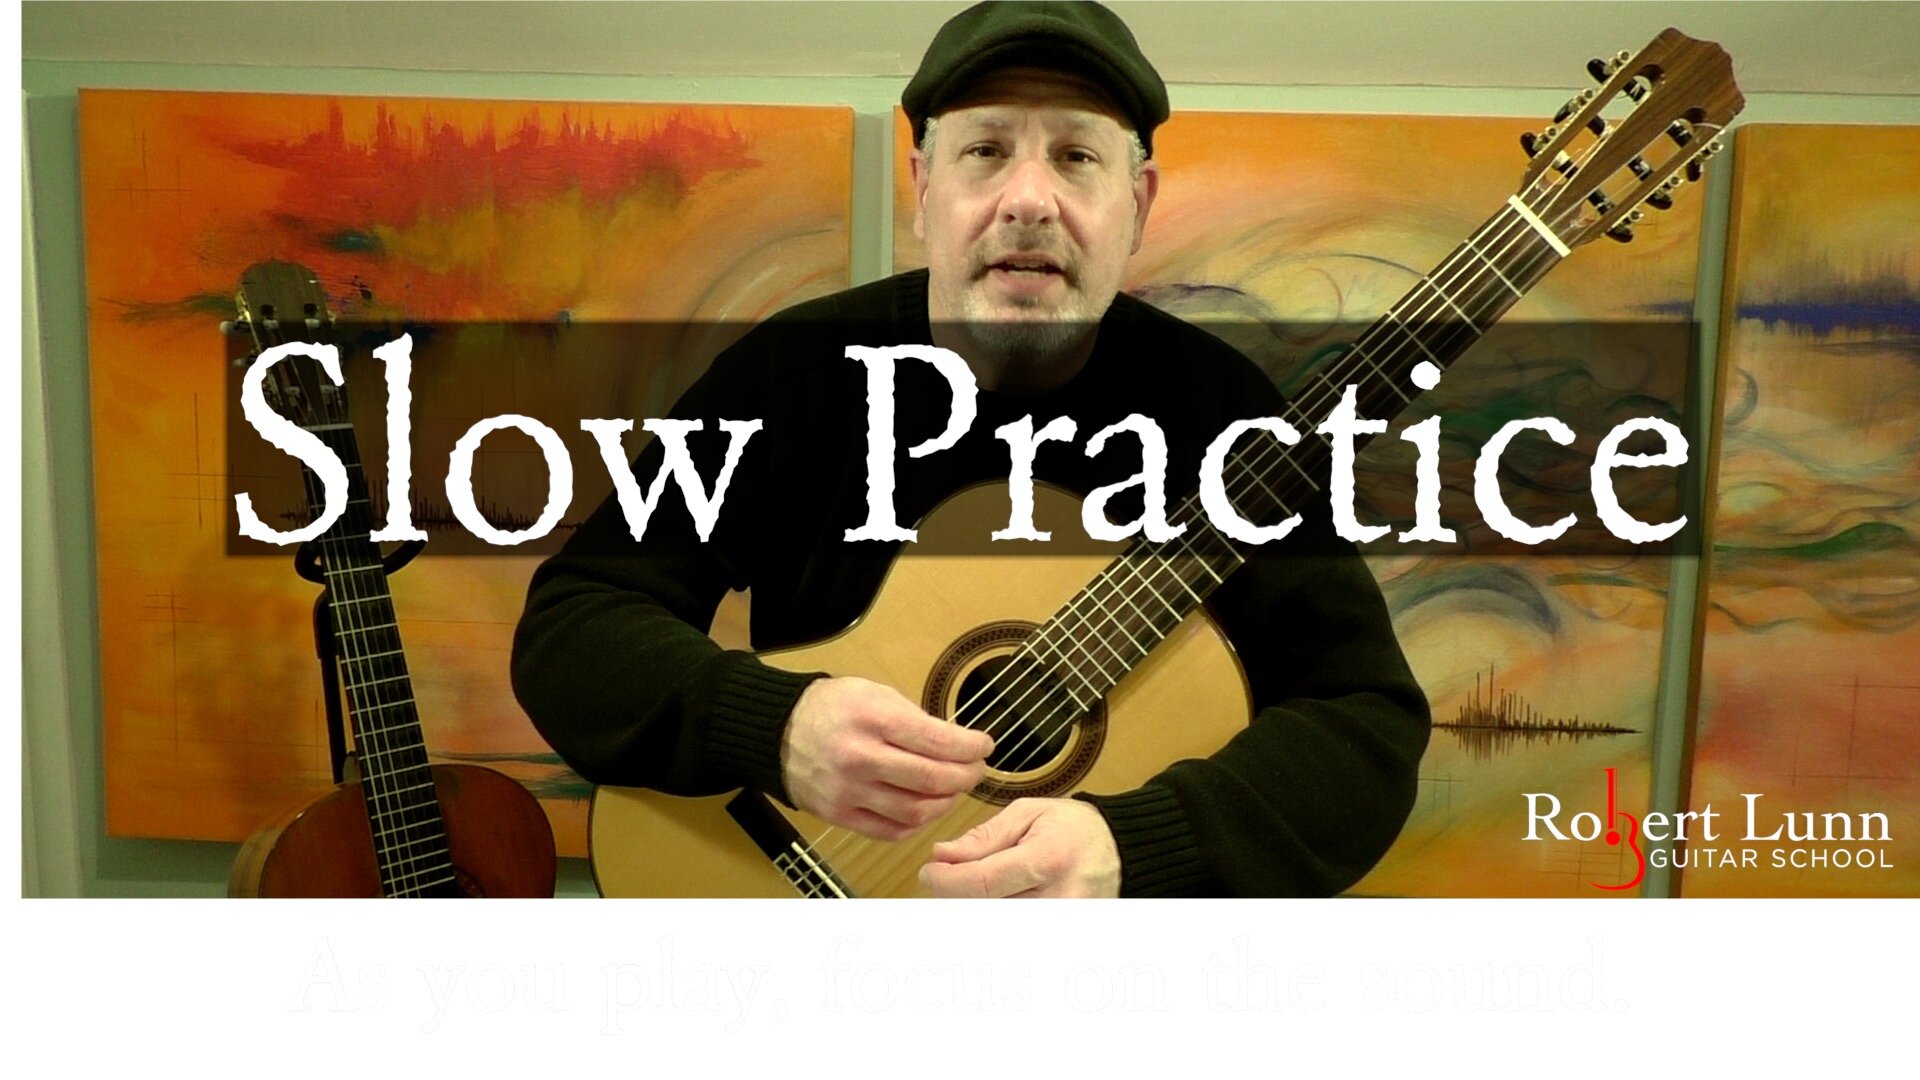 Slow Practice (One Minute Lesson) Thumbnail.jpg